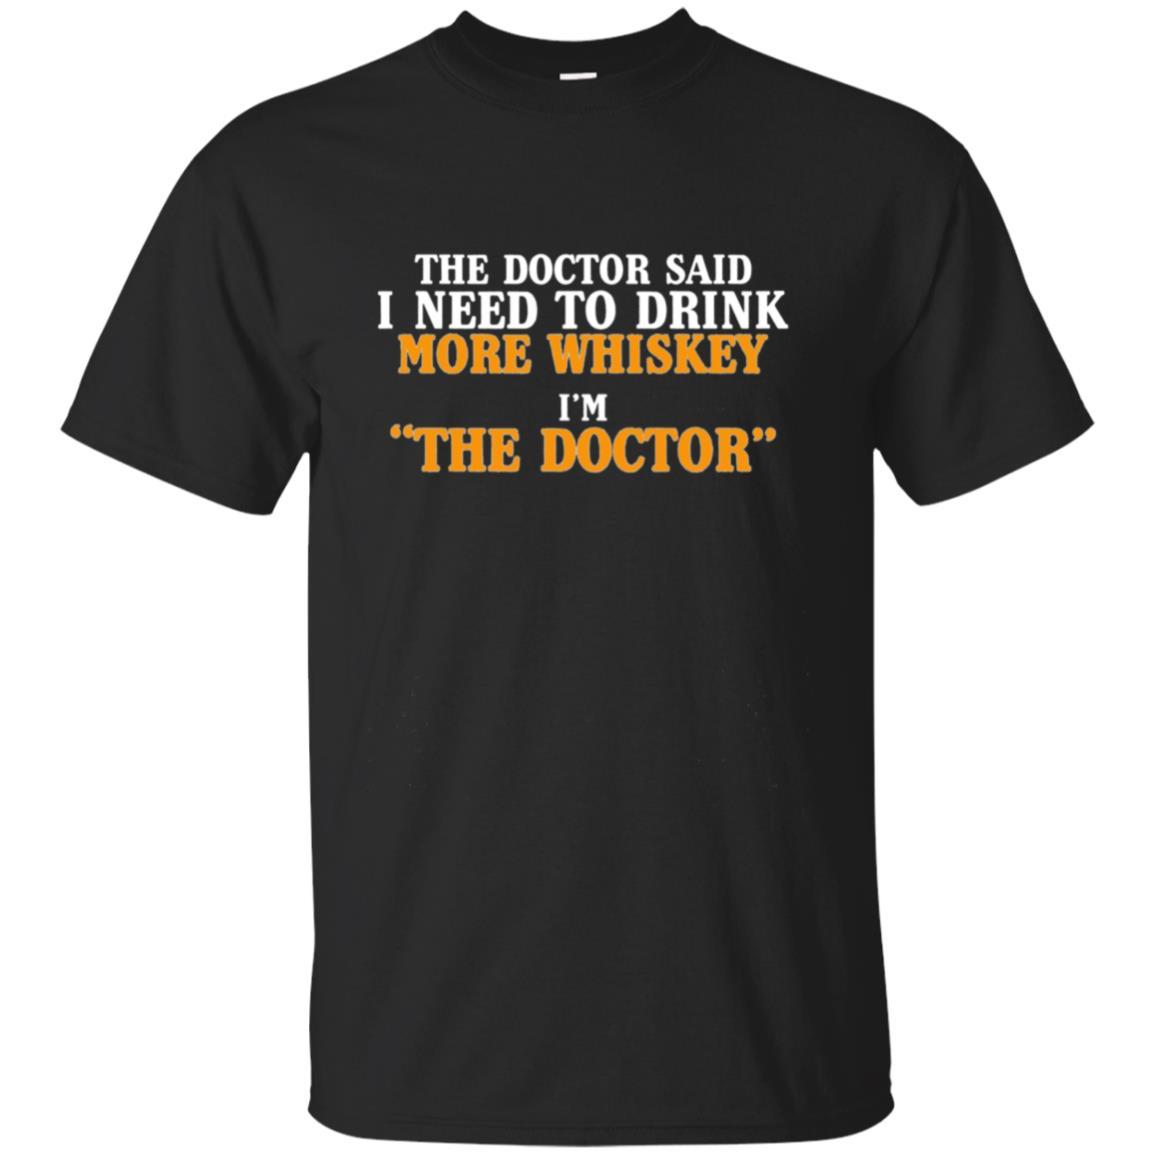 Shop From 1000 Unique The Doctor Said I Need To Drink More Whisky T Shirt